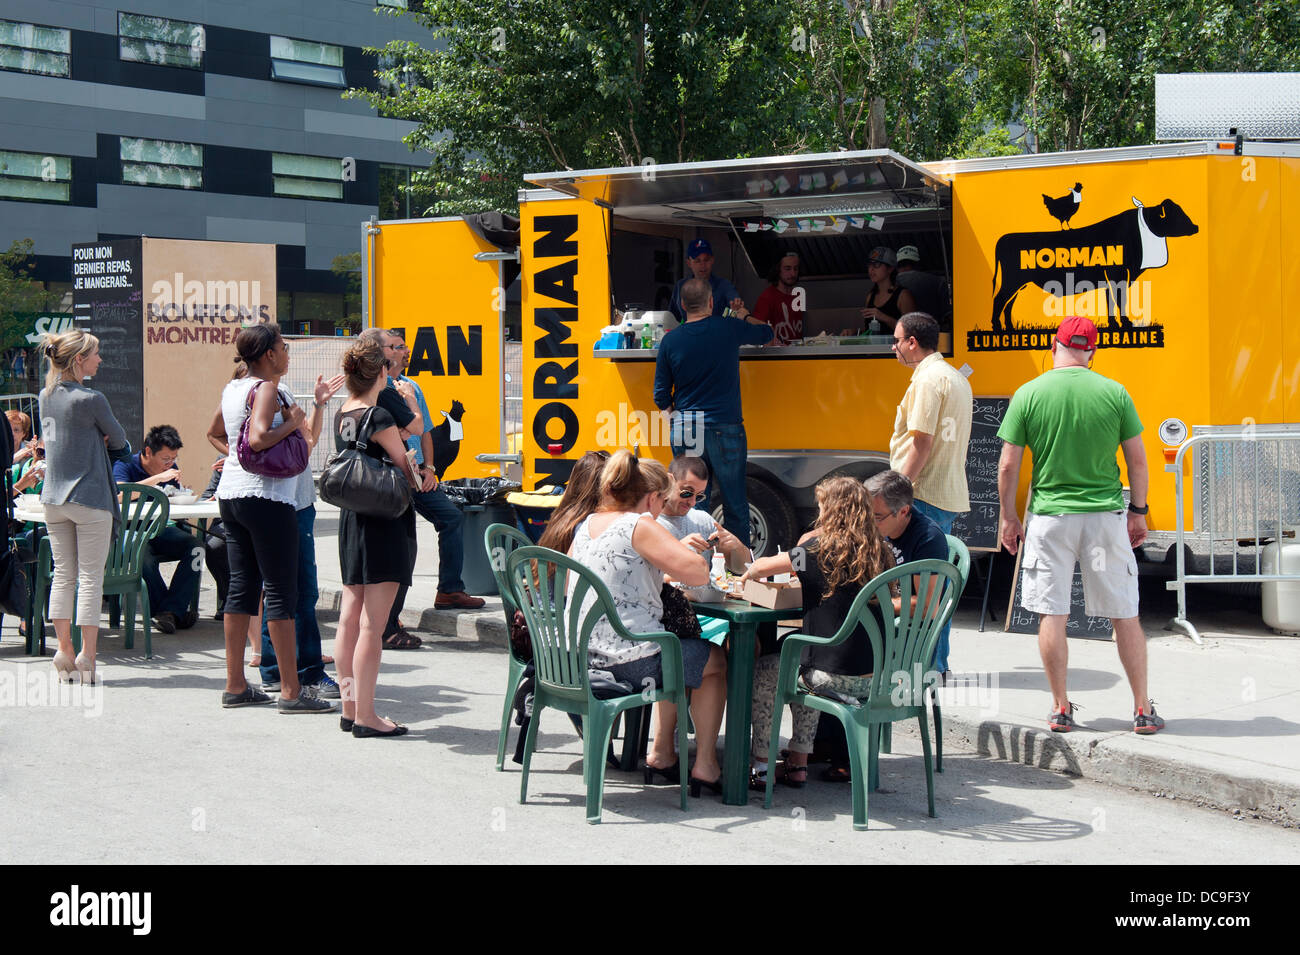 Mobile food vendor, Montreal, province of Quebec, Canada. Stock Photo